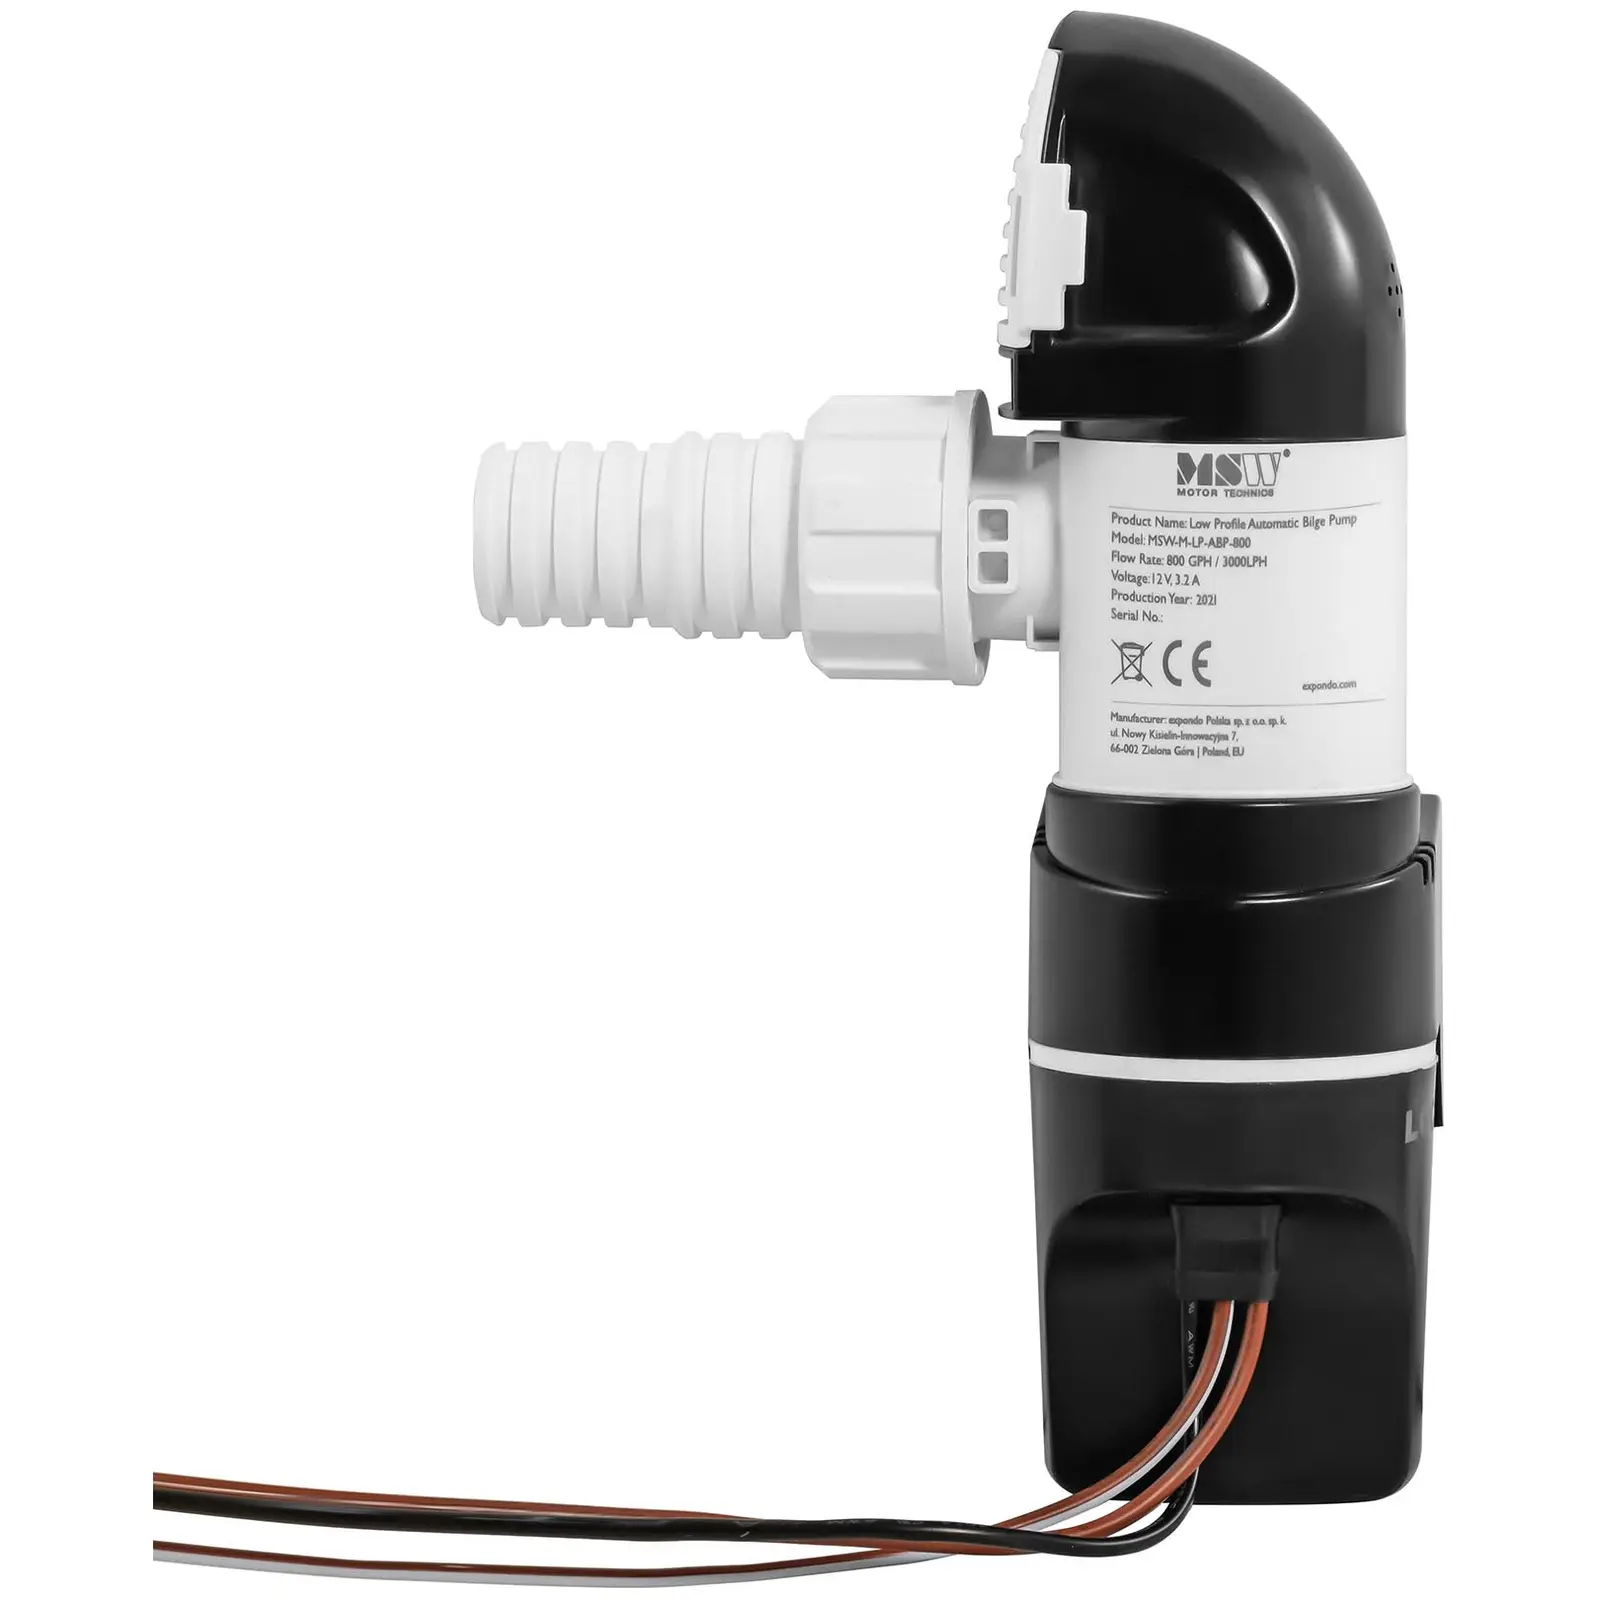 Automatic bilge pump with extra low profile - 3 m head - 50 l/min flow rate